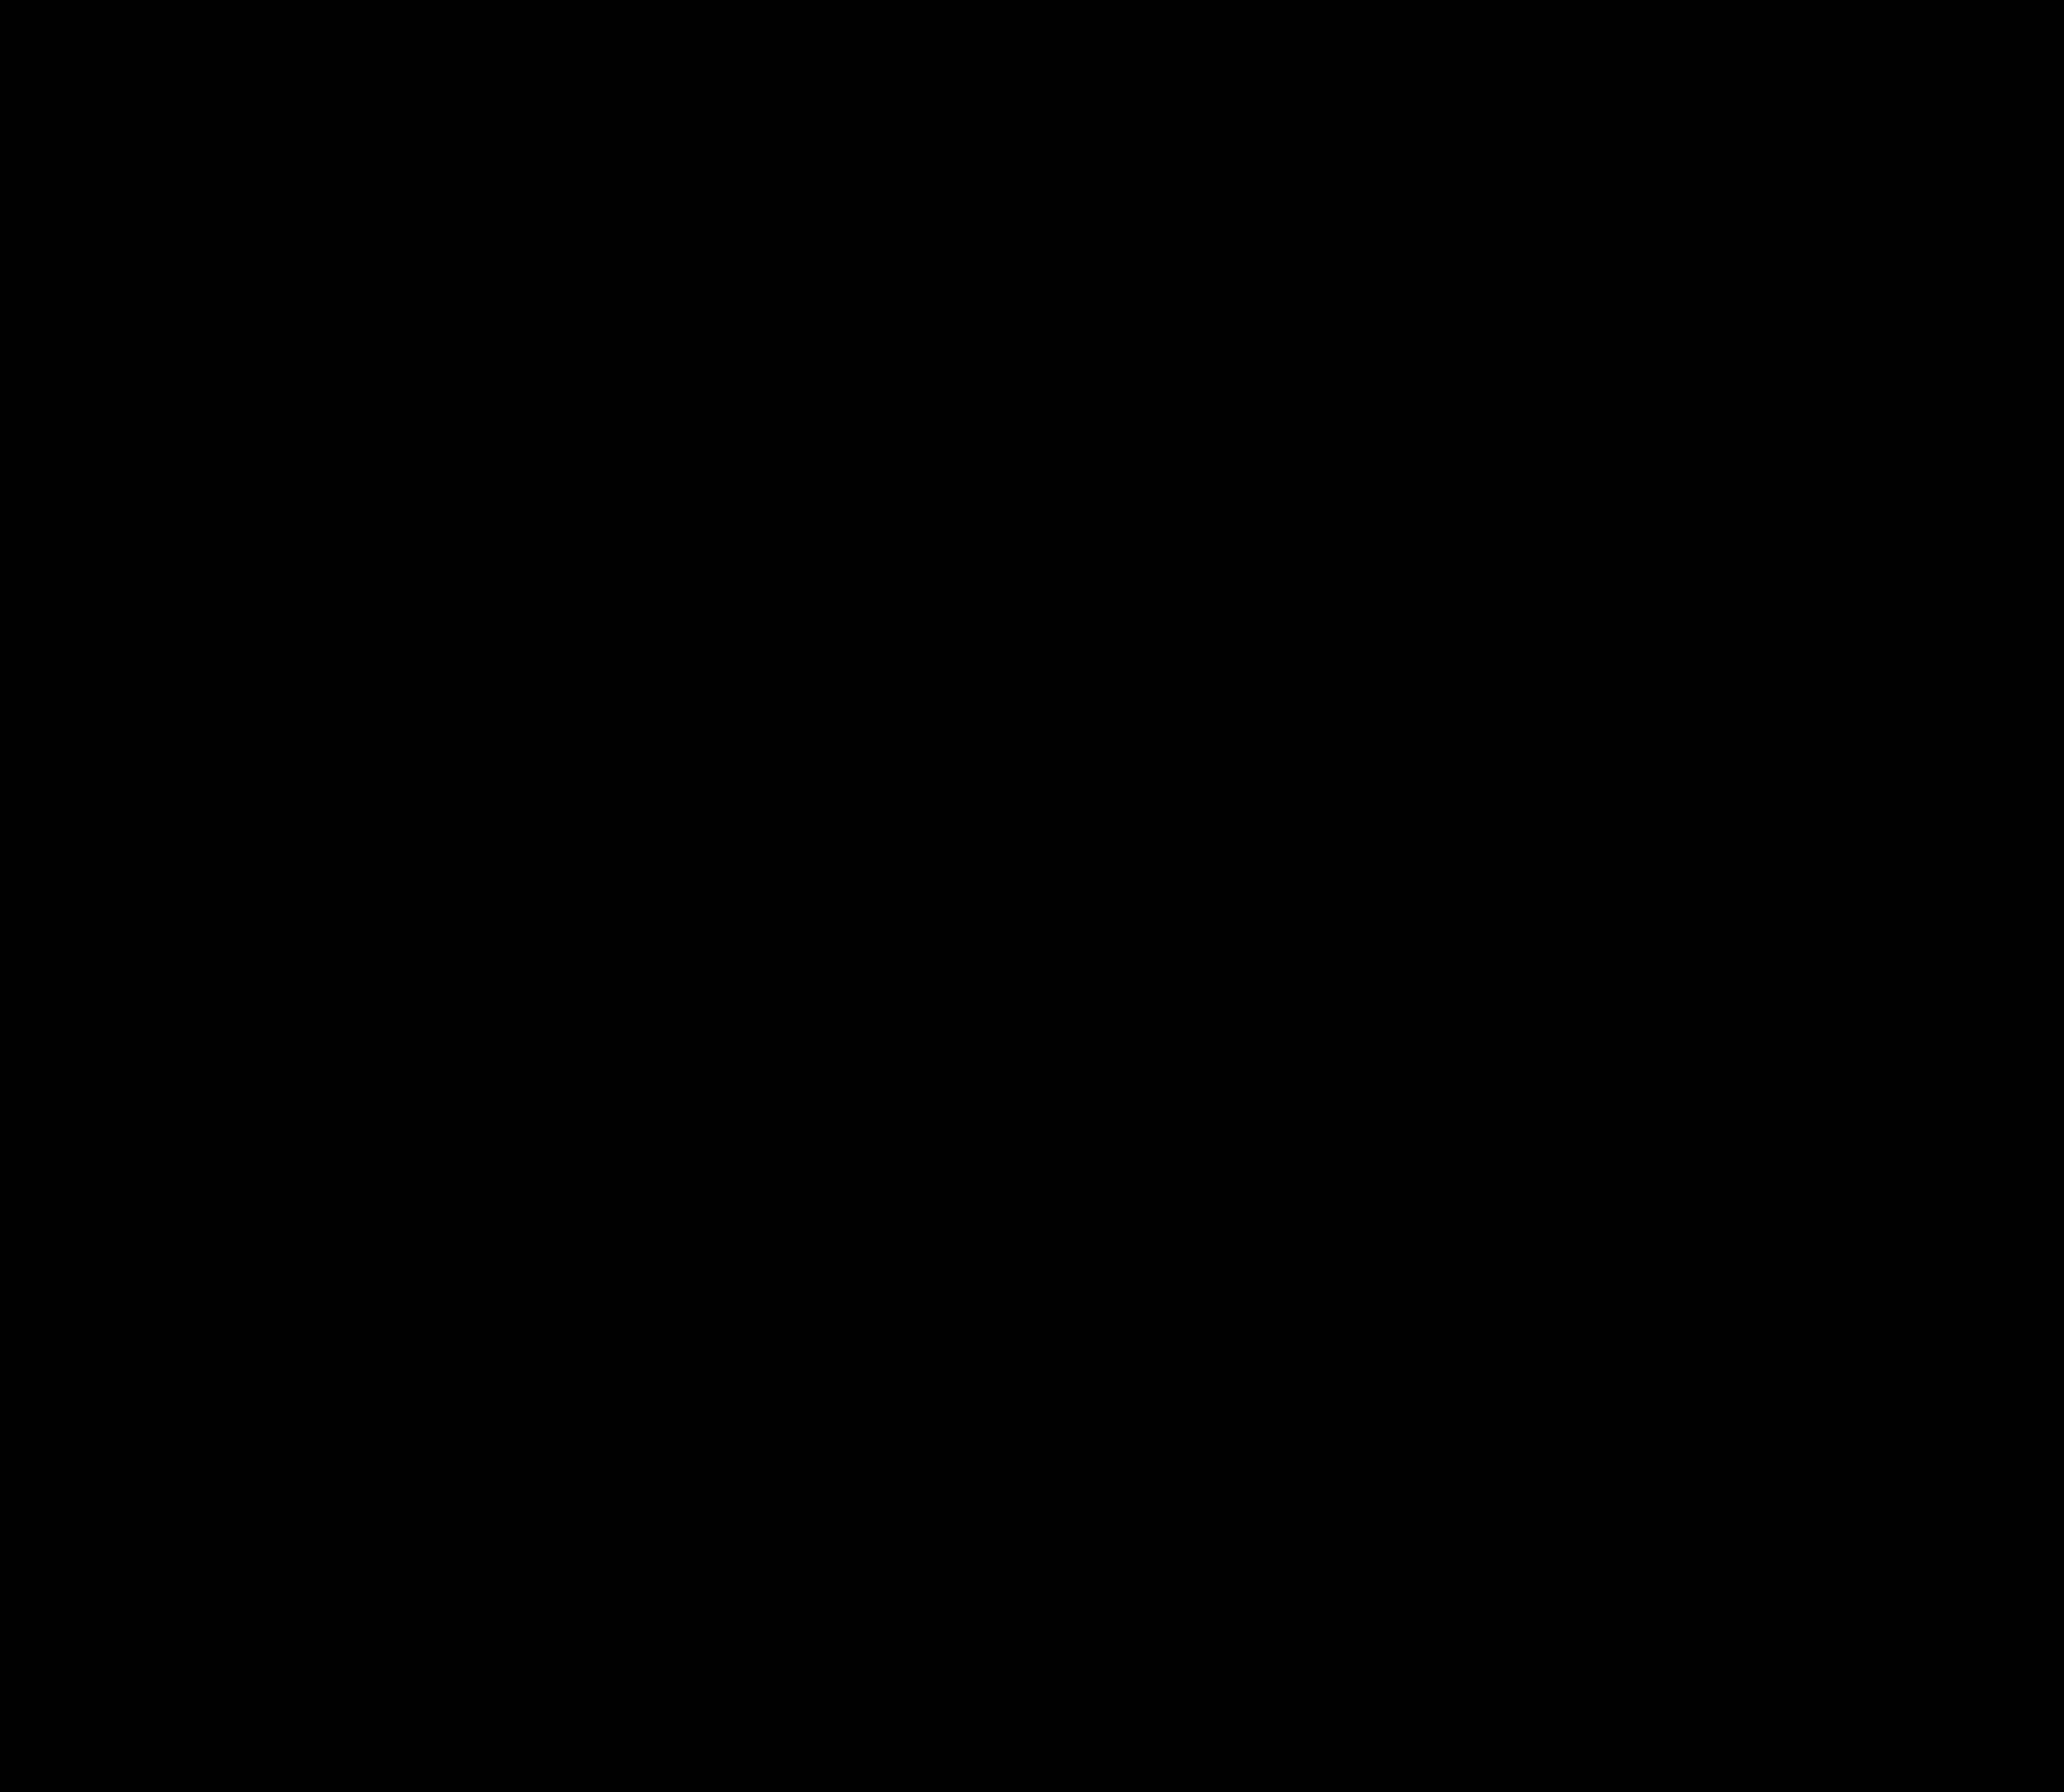 Pure Black Background PNG